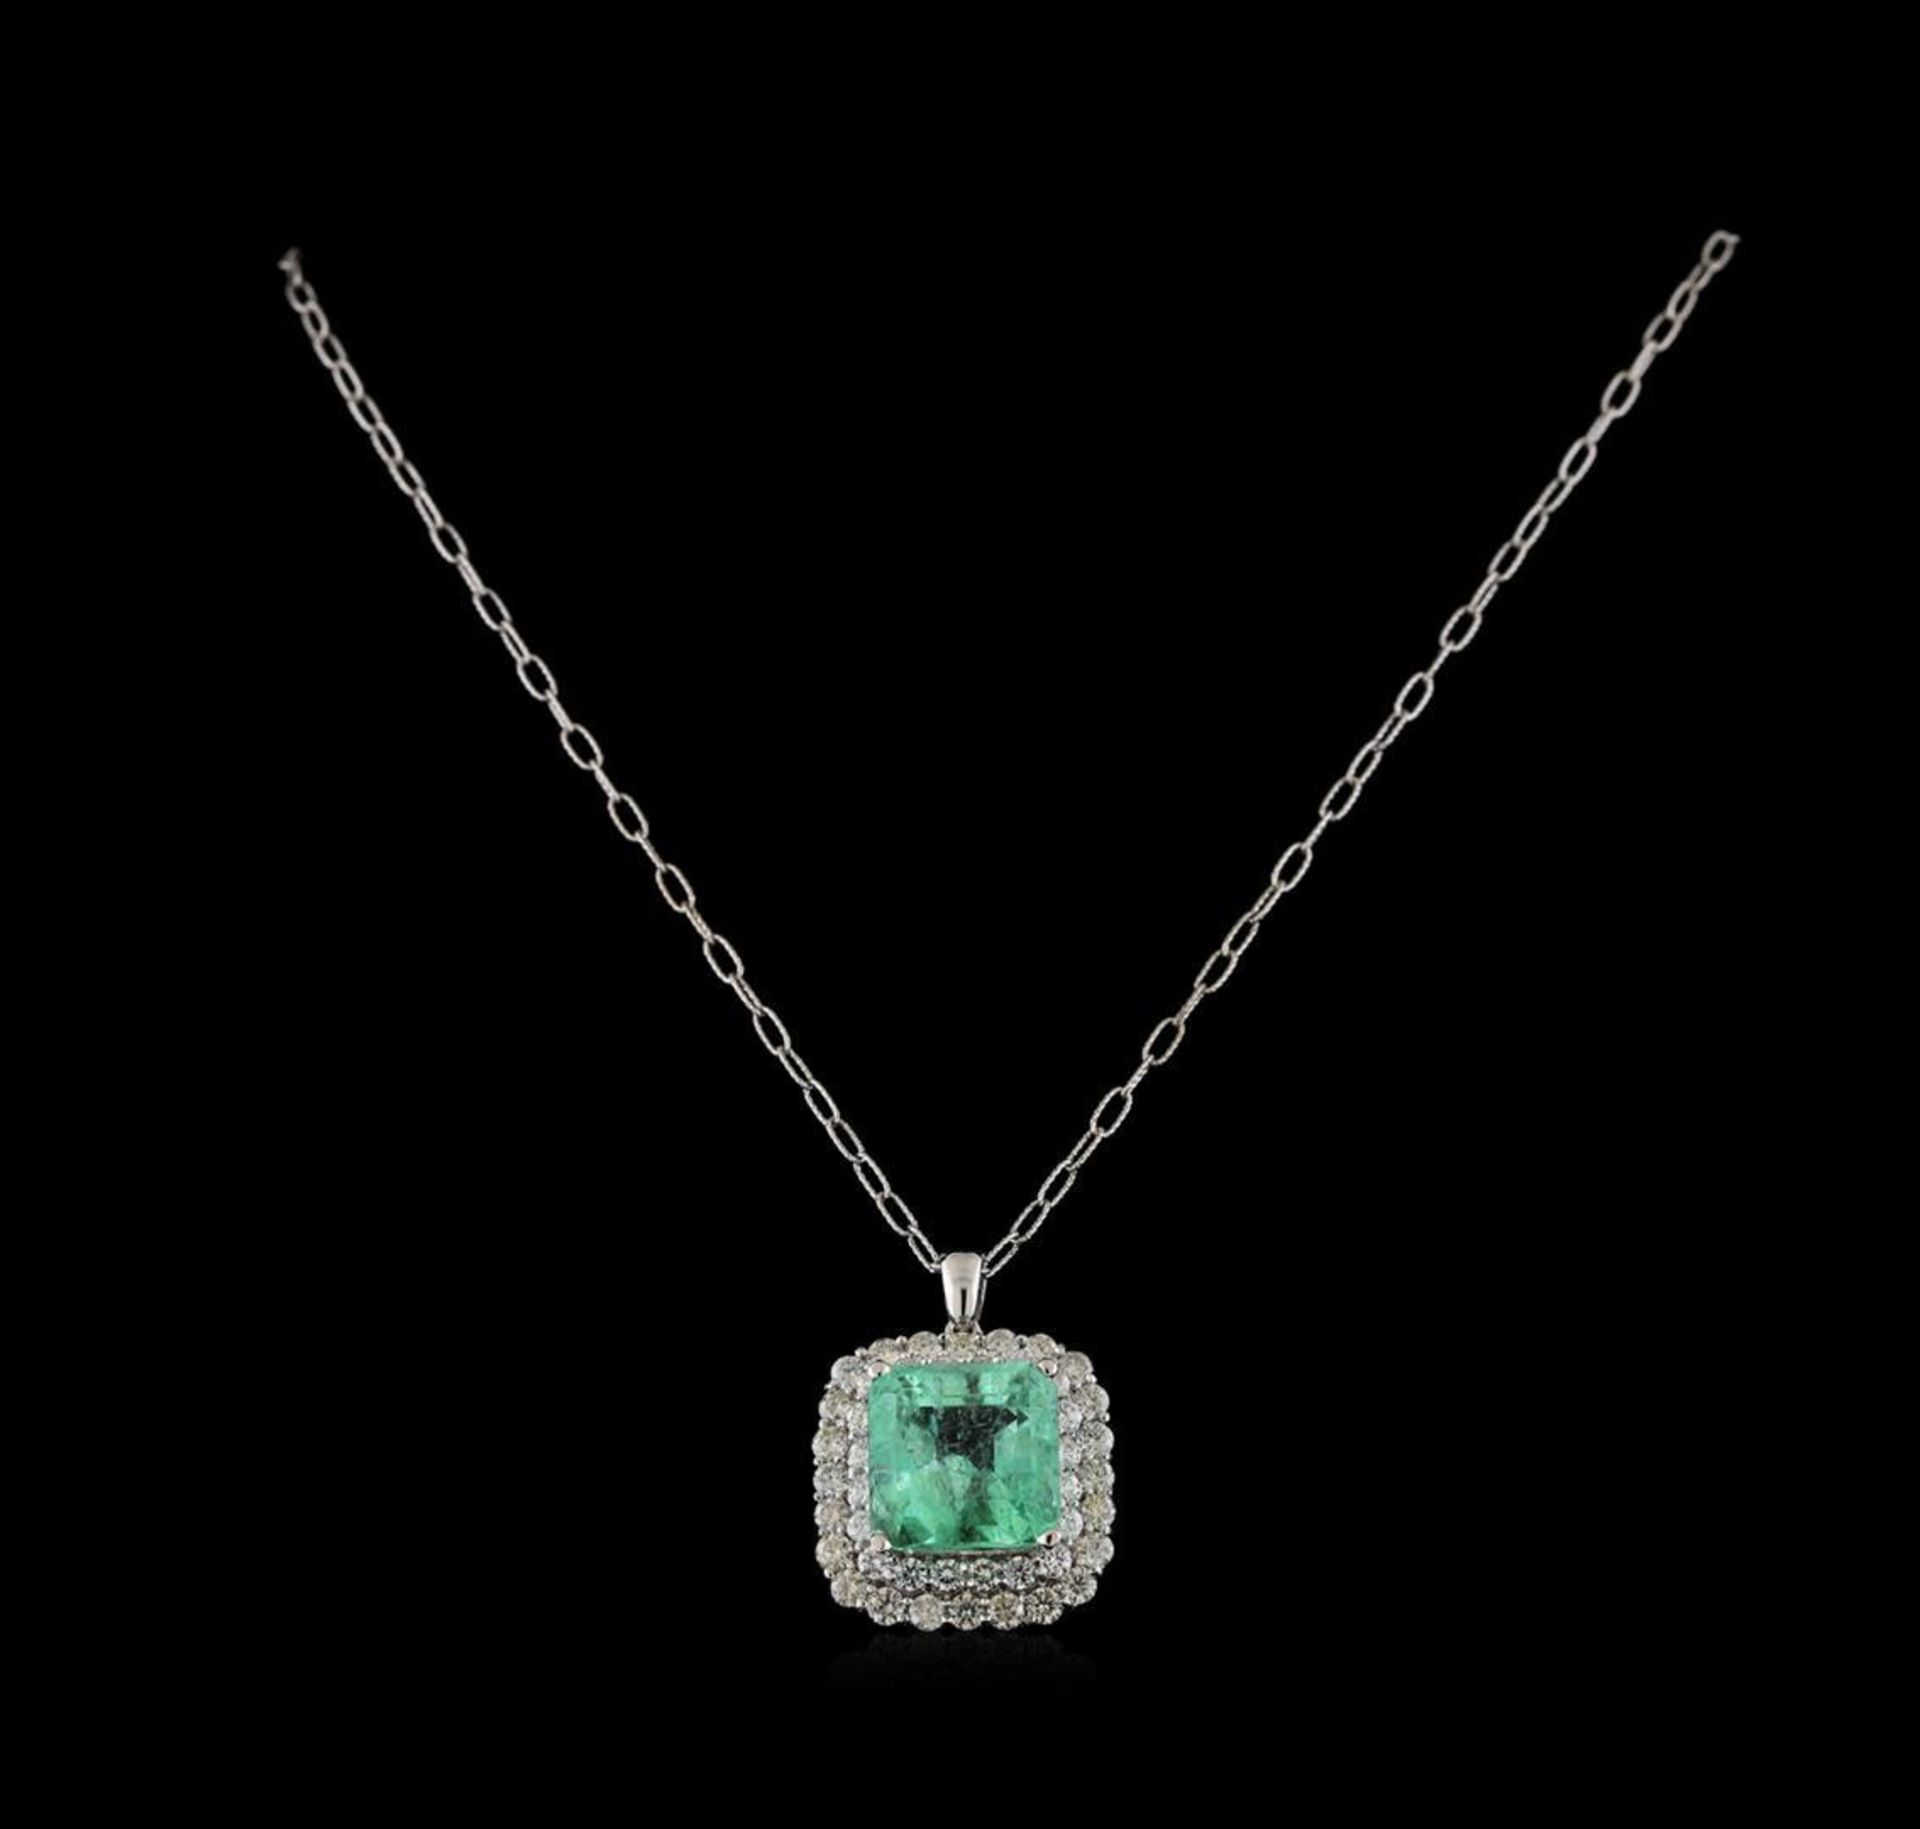 18.09 ctw Emerald and Diamond Pendant With Chain - 14KT White Gold - Image 4 of 8